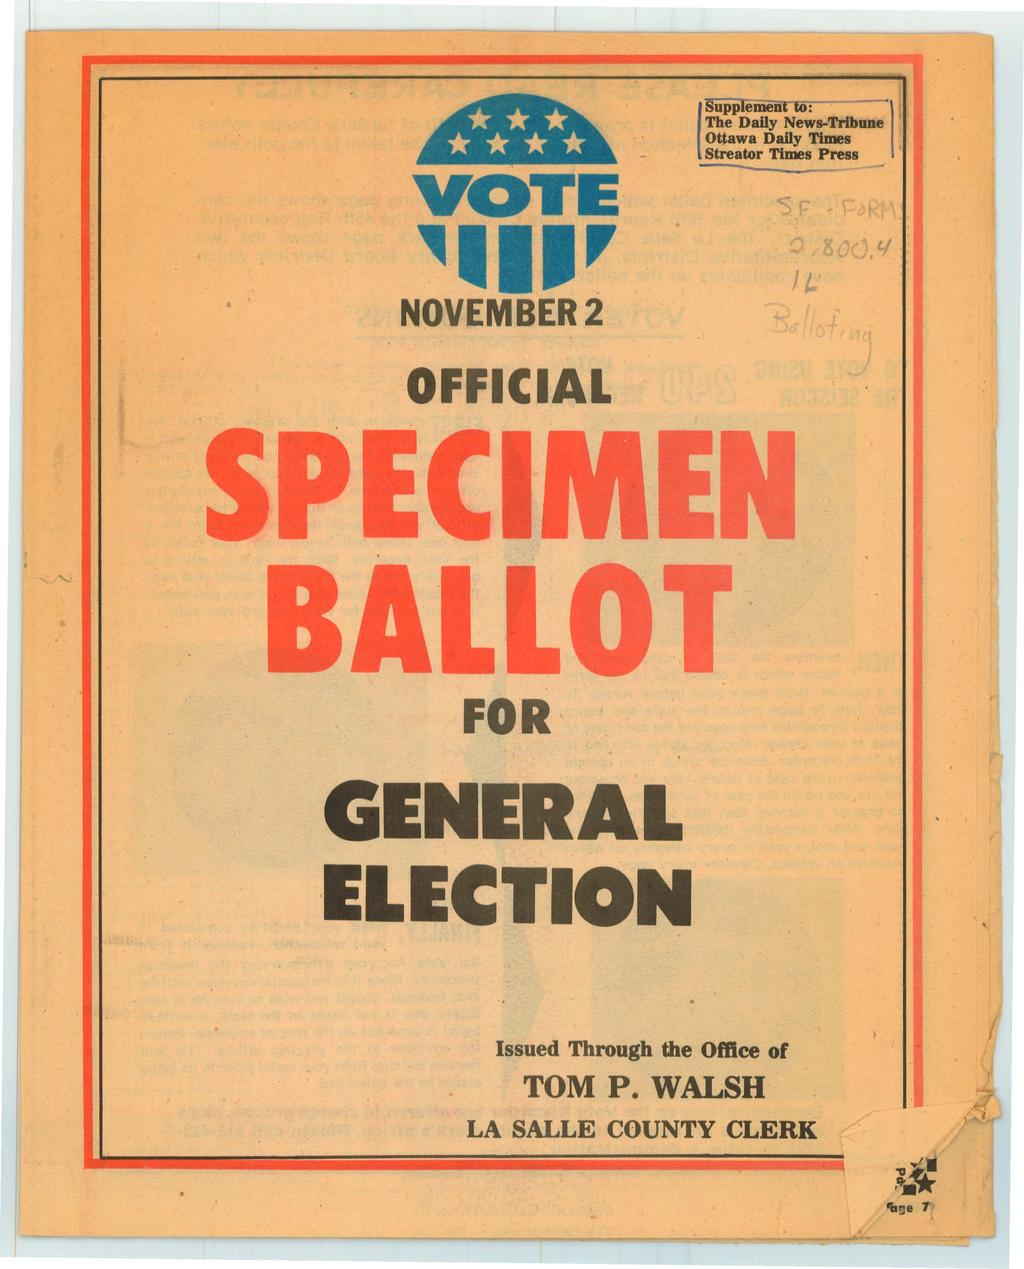 ' *** **** VOTE, NOVEMBER2 OFFICIAL 1 1-' FOR GENERAL ELECTION Issued